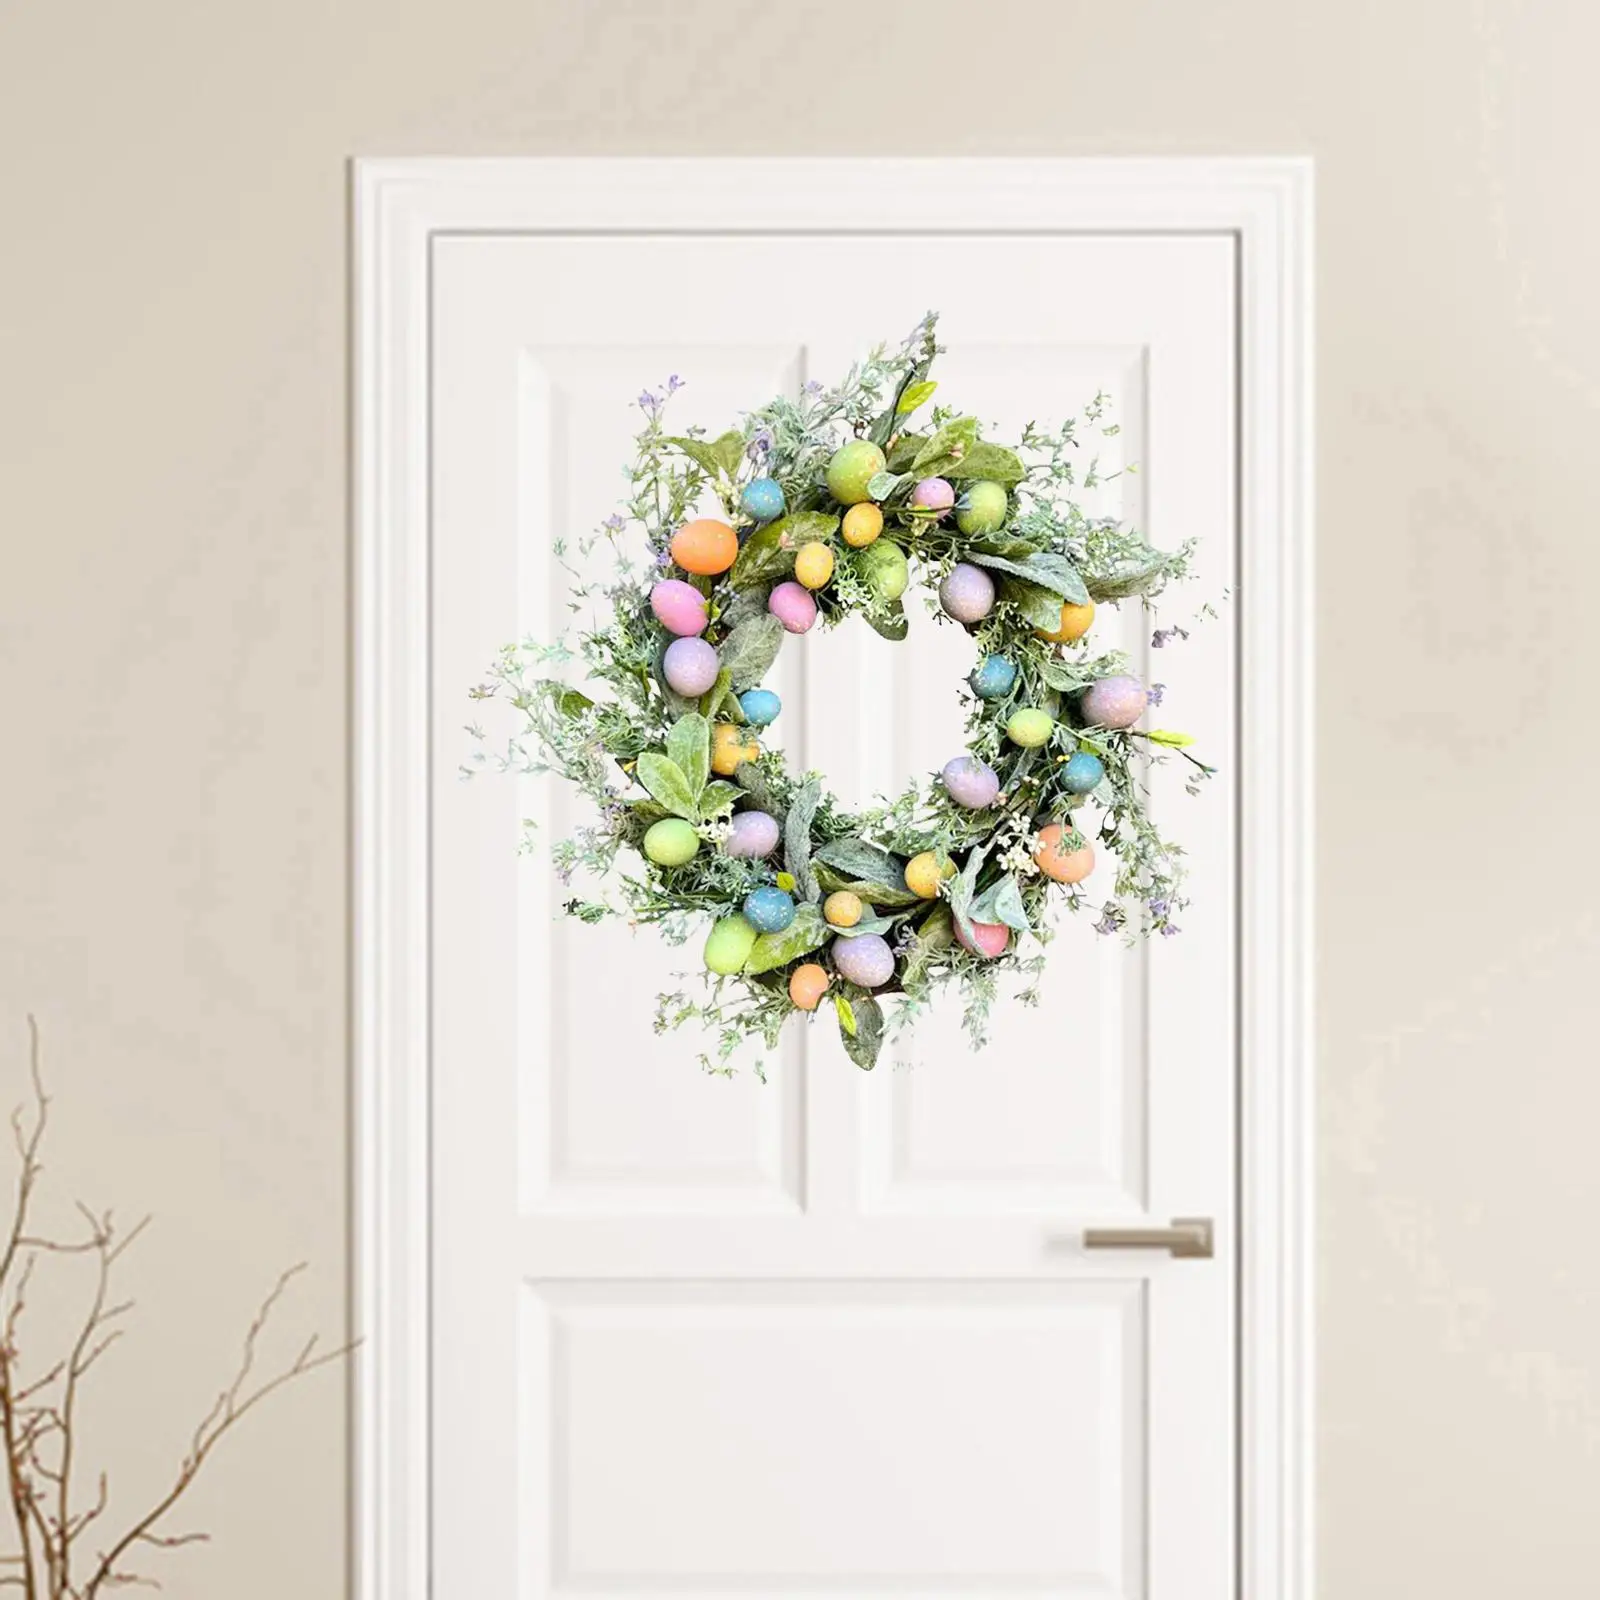 17.72inch Eucalyptus Wreath Decoration Artificial Flowers Outside Colorful Egg Garland for Wedding Winter Autumn Window Holiday